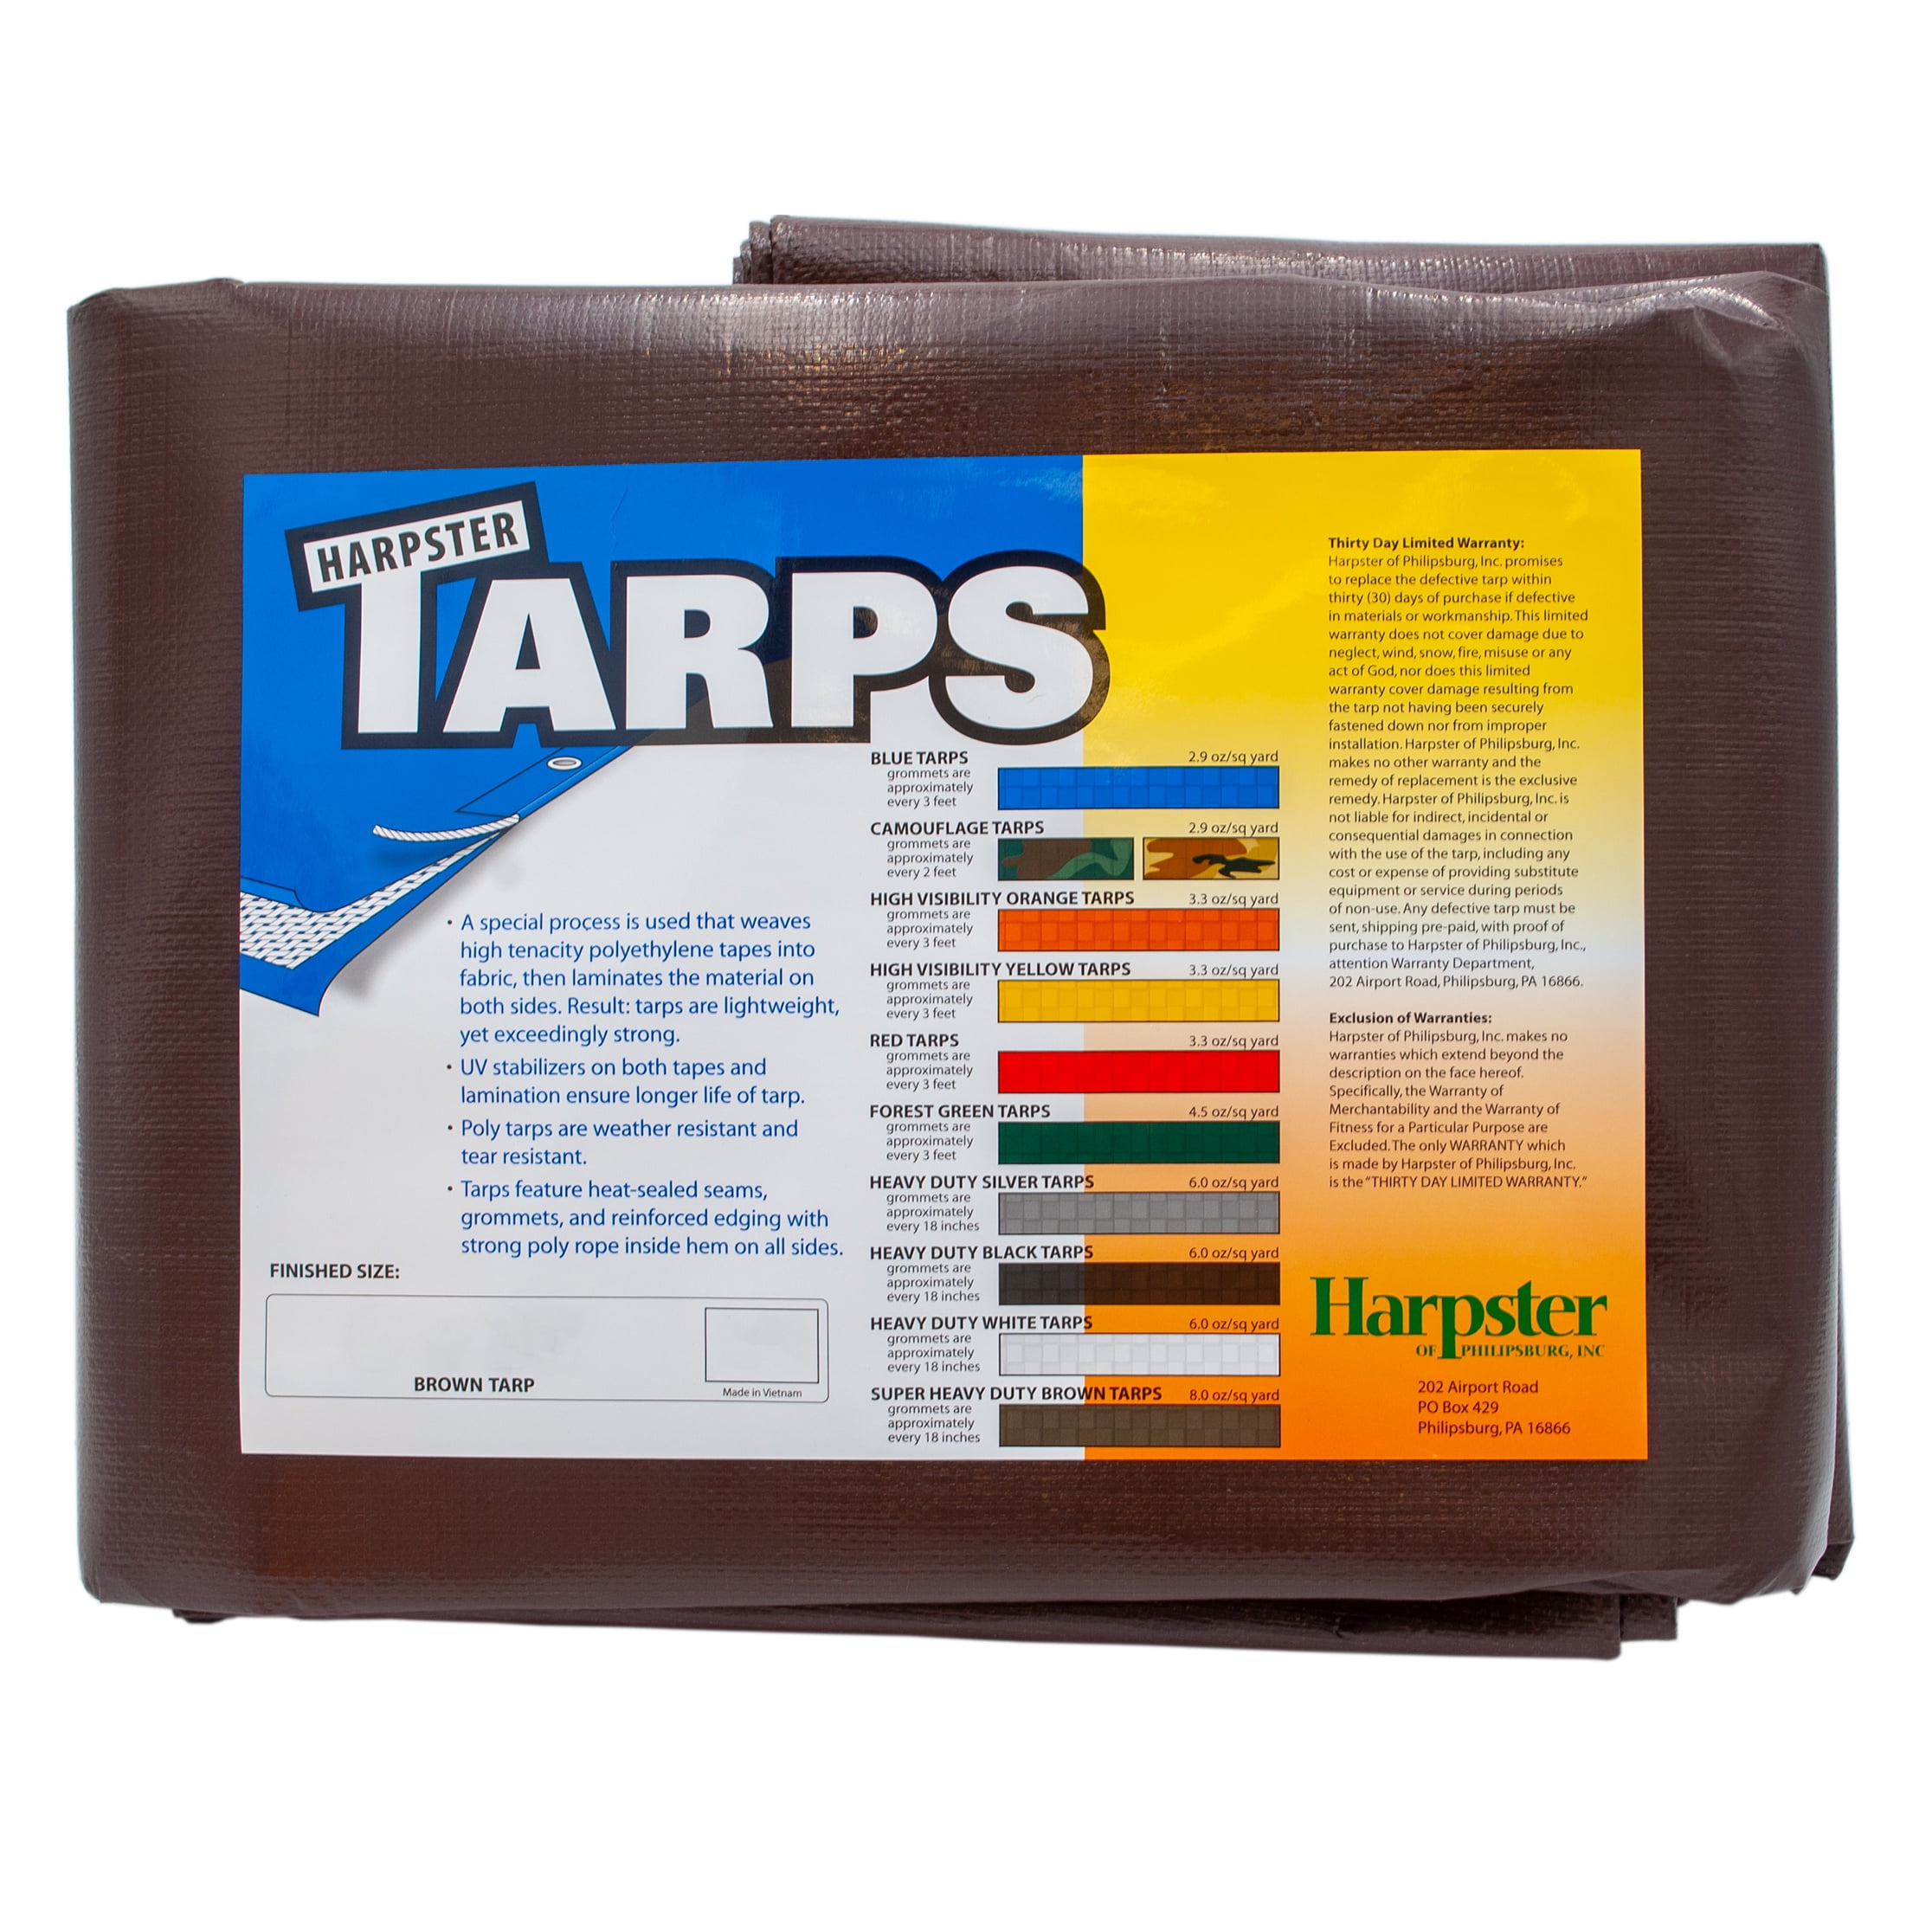 Super Heavy Duty Waterproof Tarp X 30 Ft Watershed Innovations HydraTarp 20 Ft White/Brown Reversible Tarp WI-HTARP-20x30-Brown-White 16mil Thick 